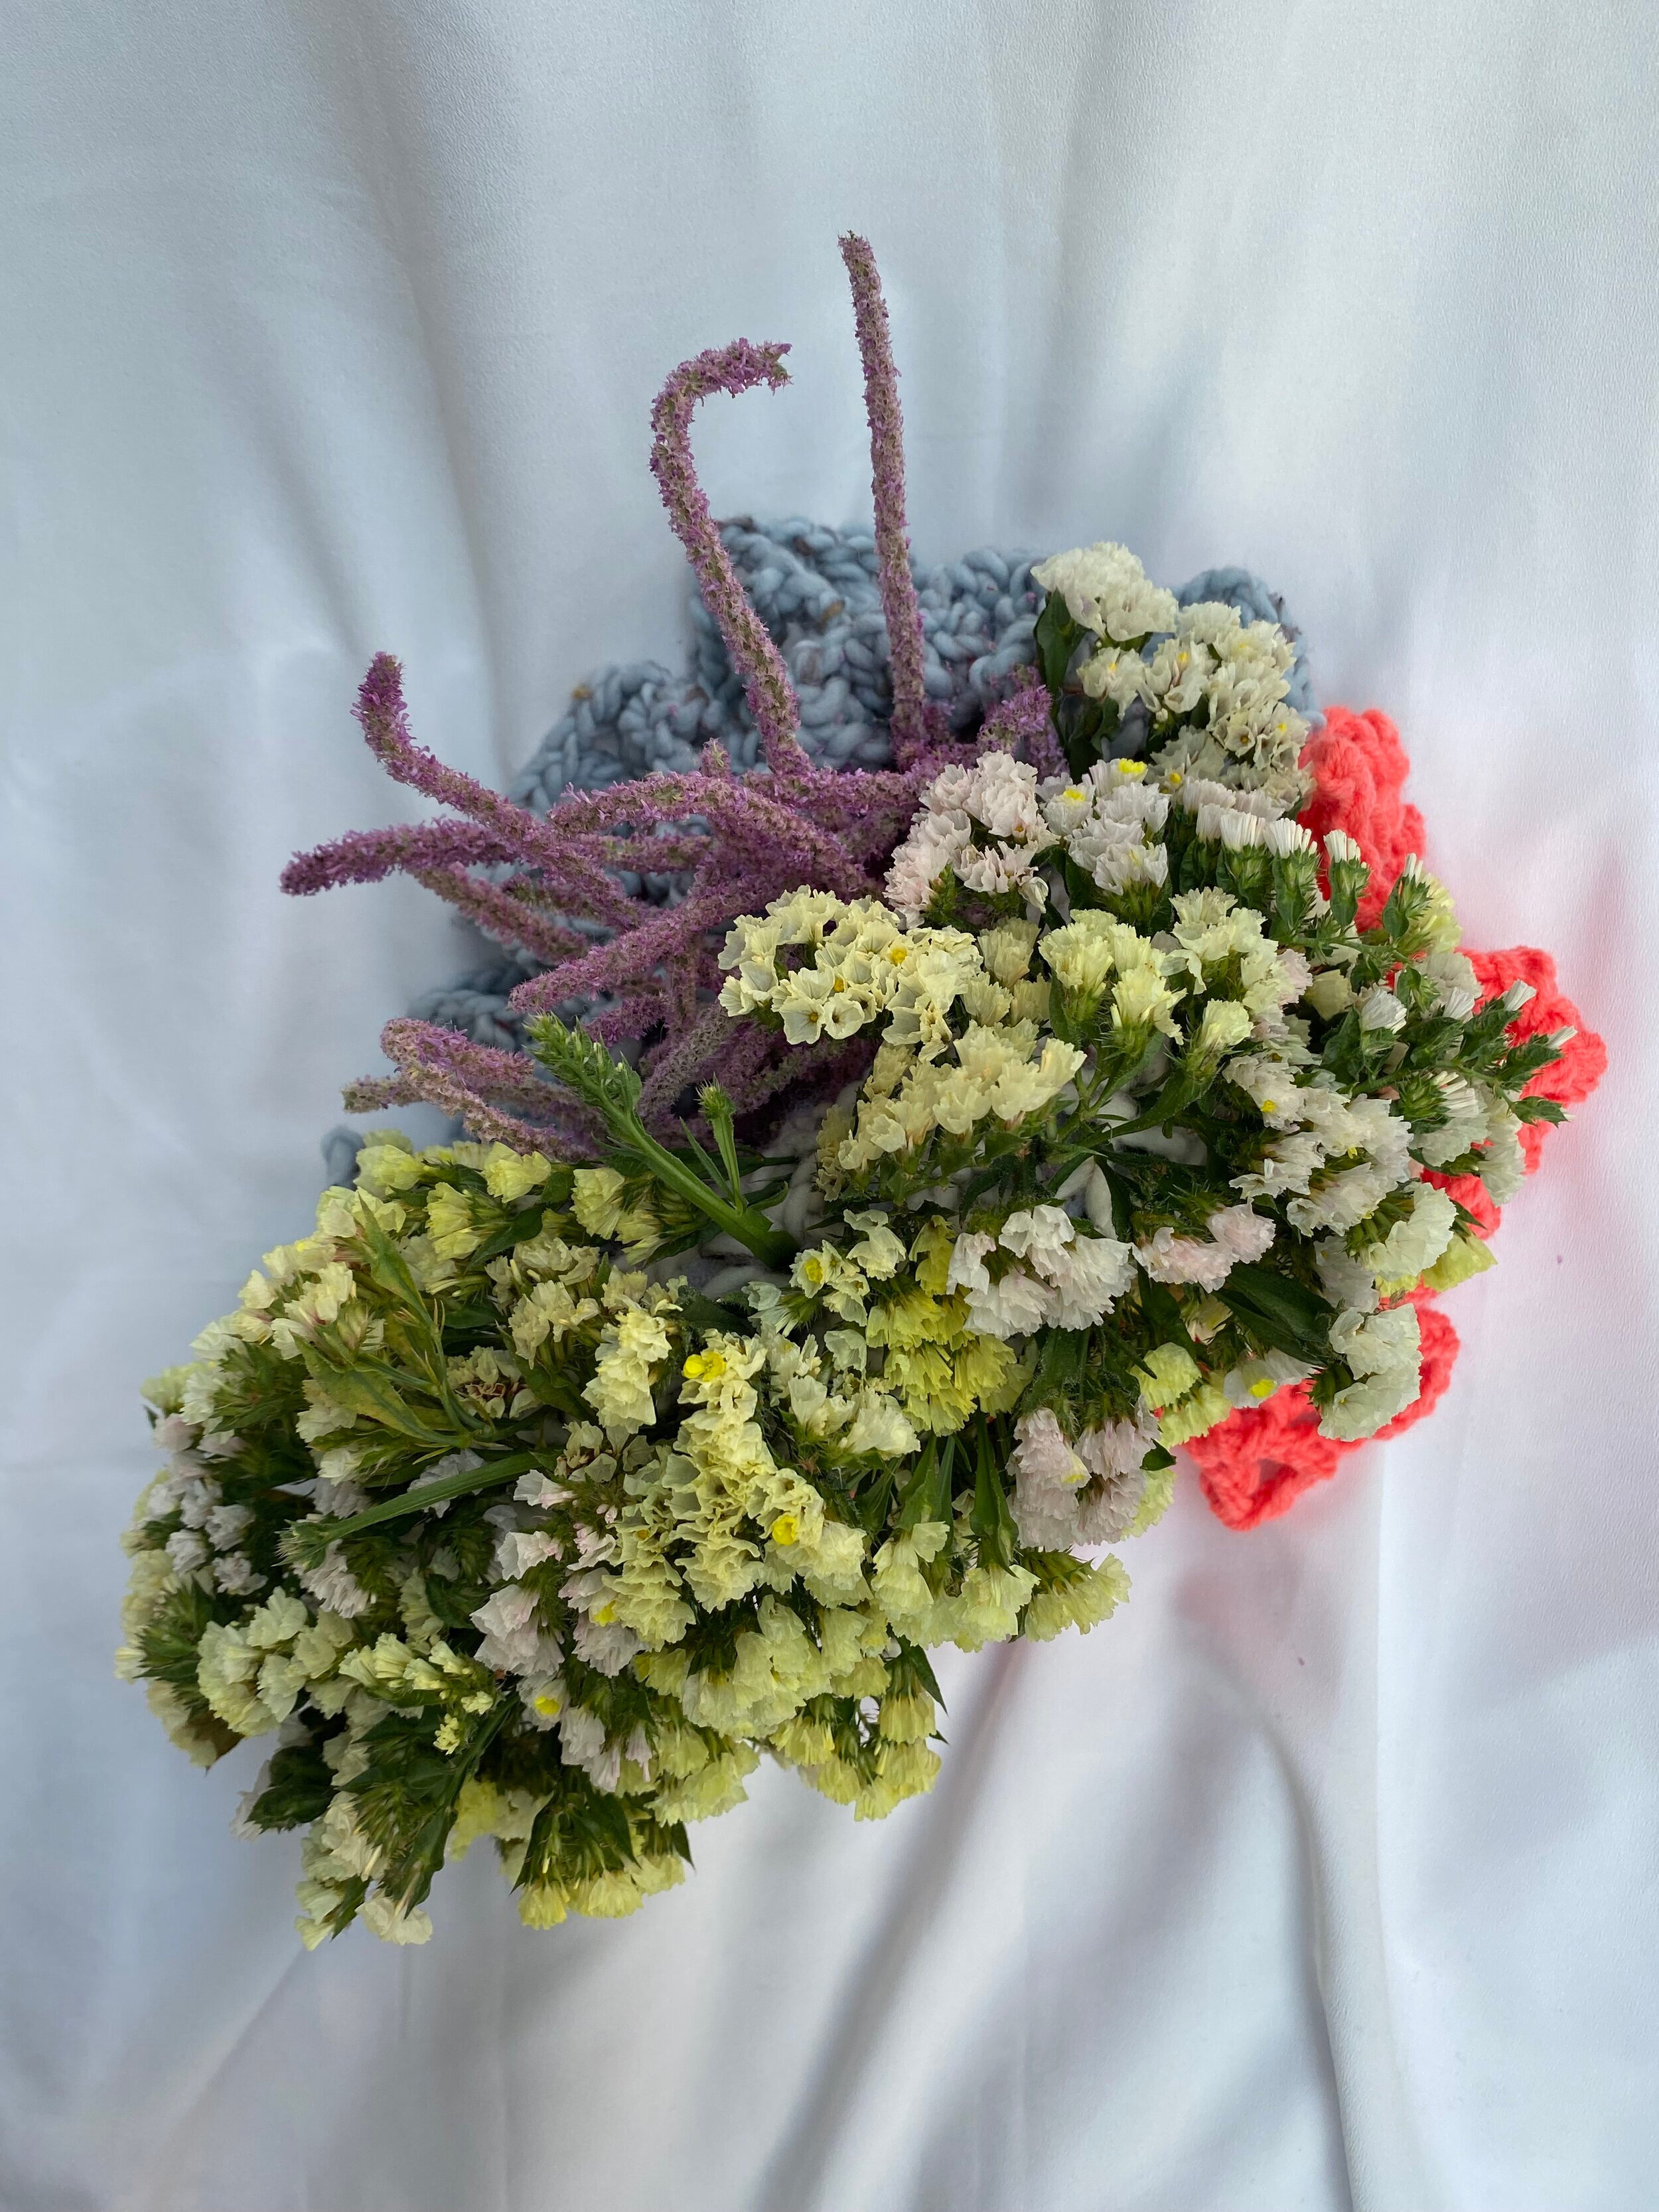  Soft sculptures, created while in my teaching residency at TUMO studios in Yerevan September/October 2021. Dimensions apx 40 x 20cm. Materials: Wool and dried flowers. 